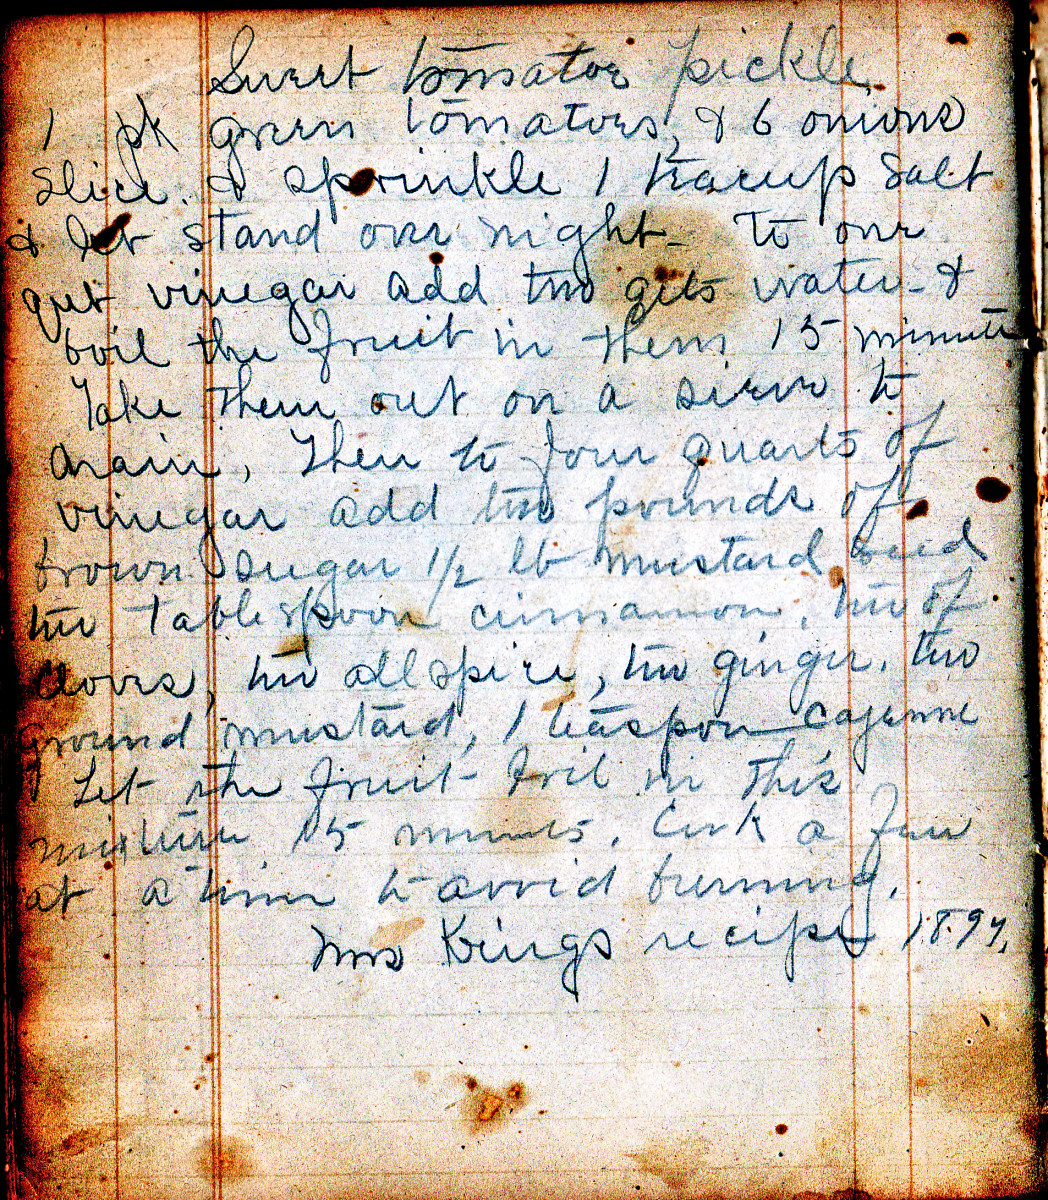 Recipe from the Flory family cookbook